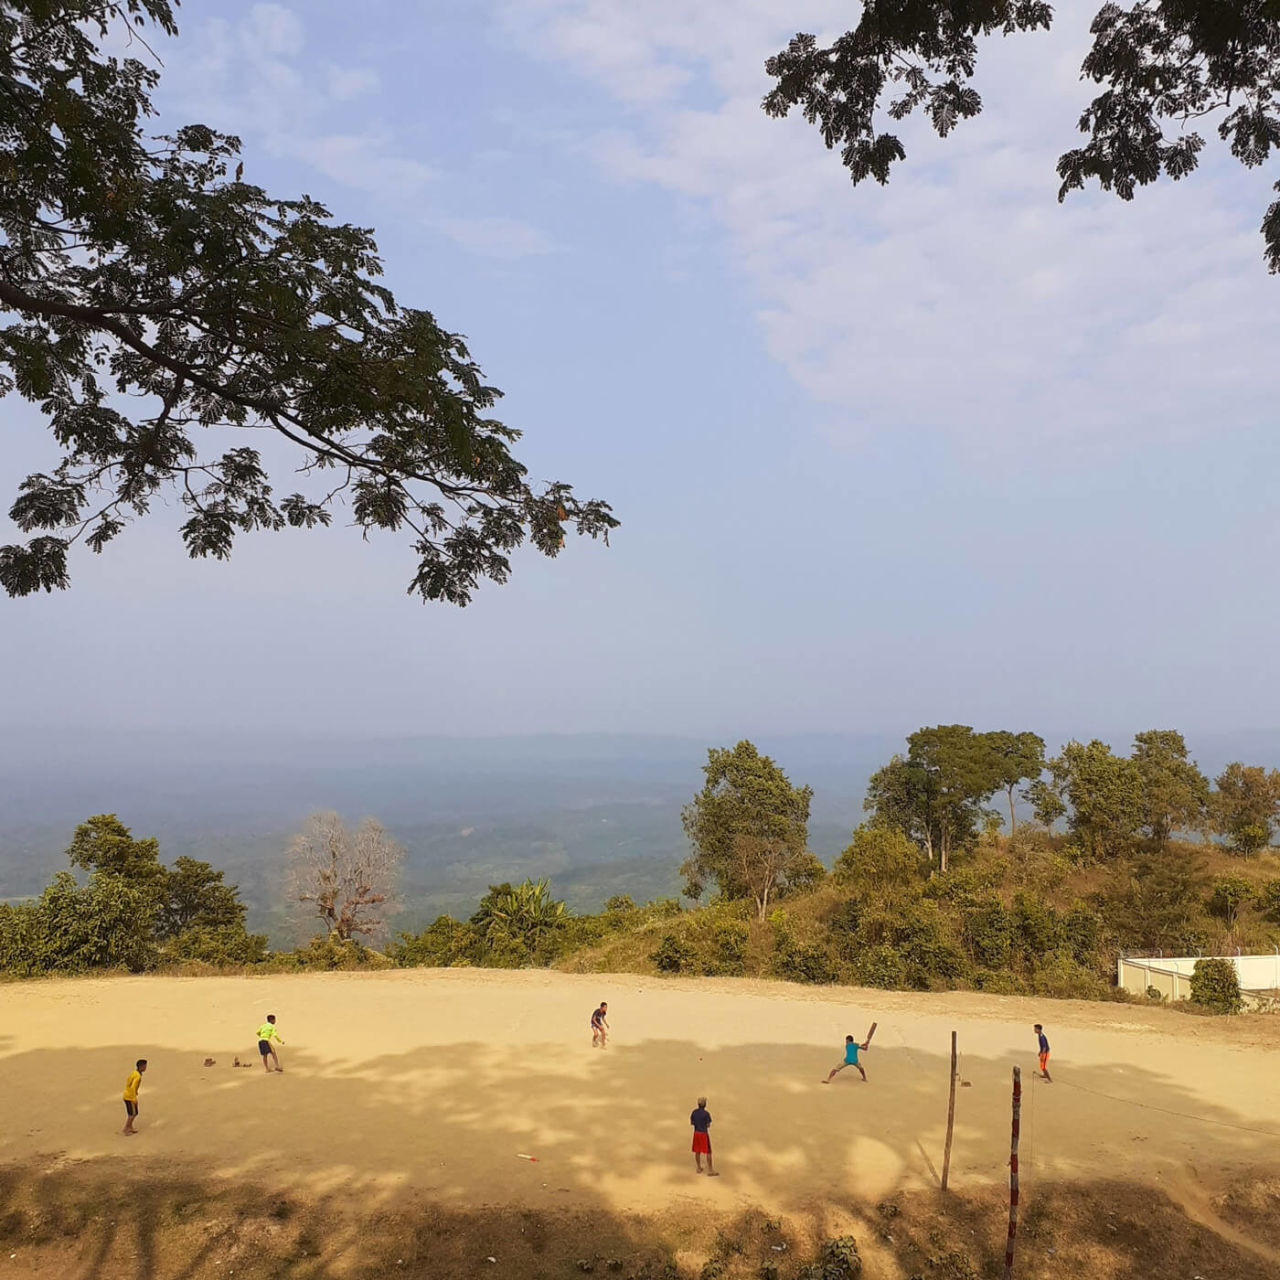 Walid Haider: There's no "extra cover" on the off side in this game in Bandarban, Bangladesh